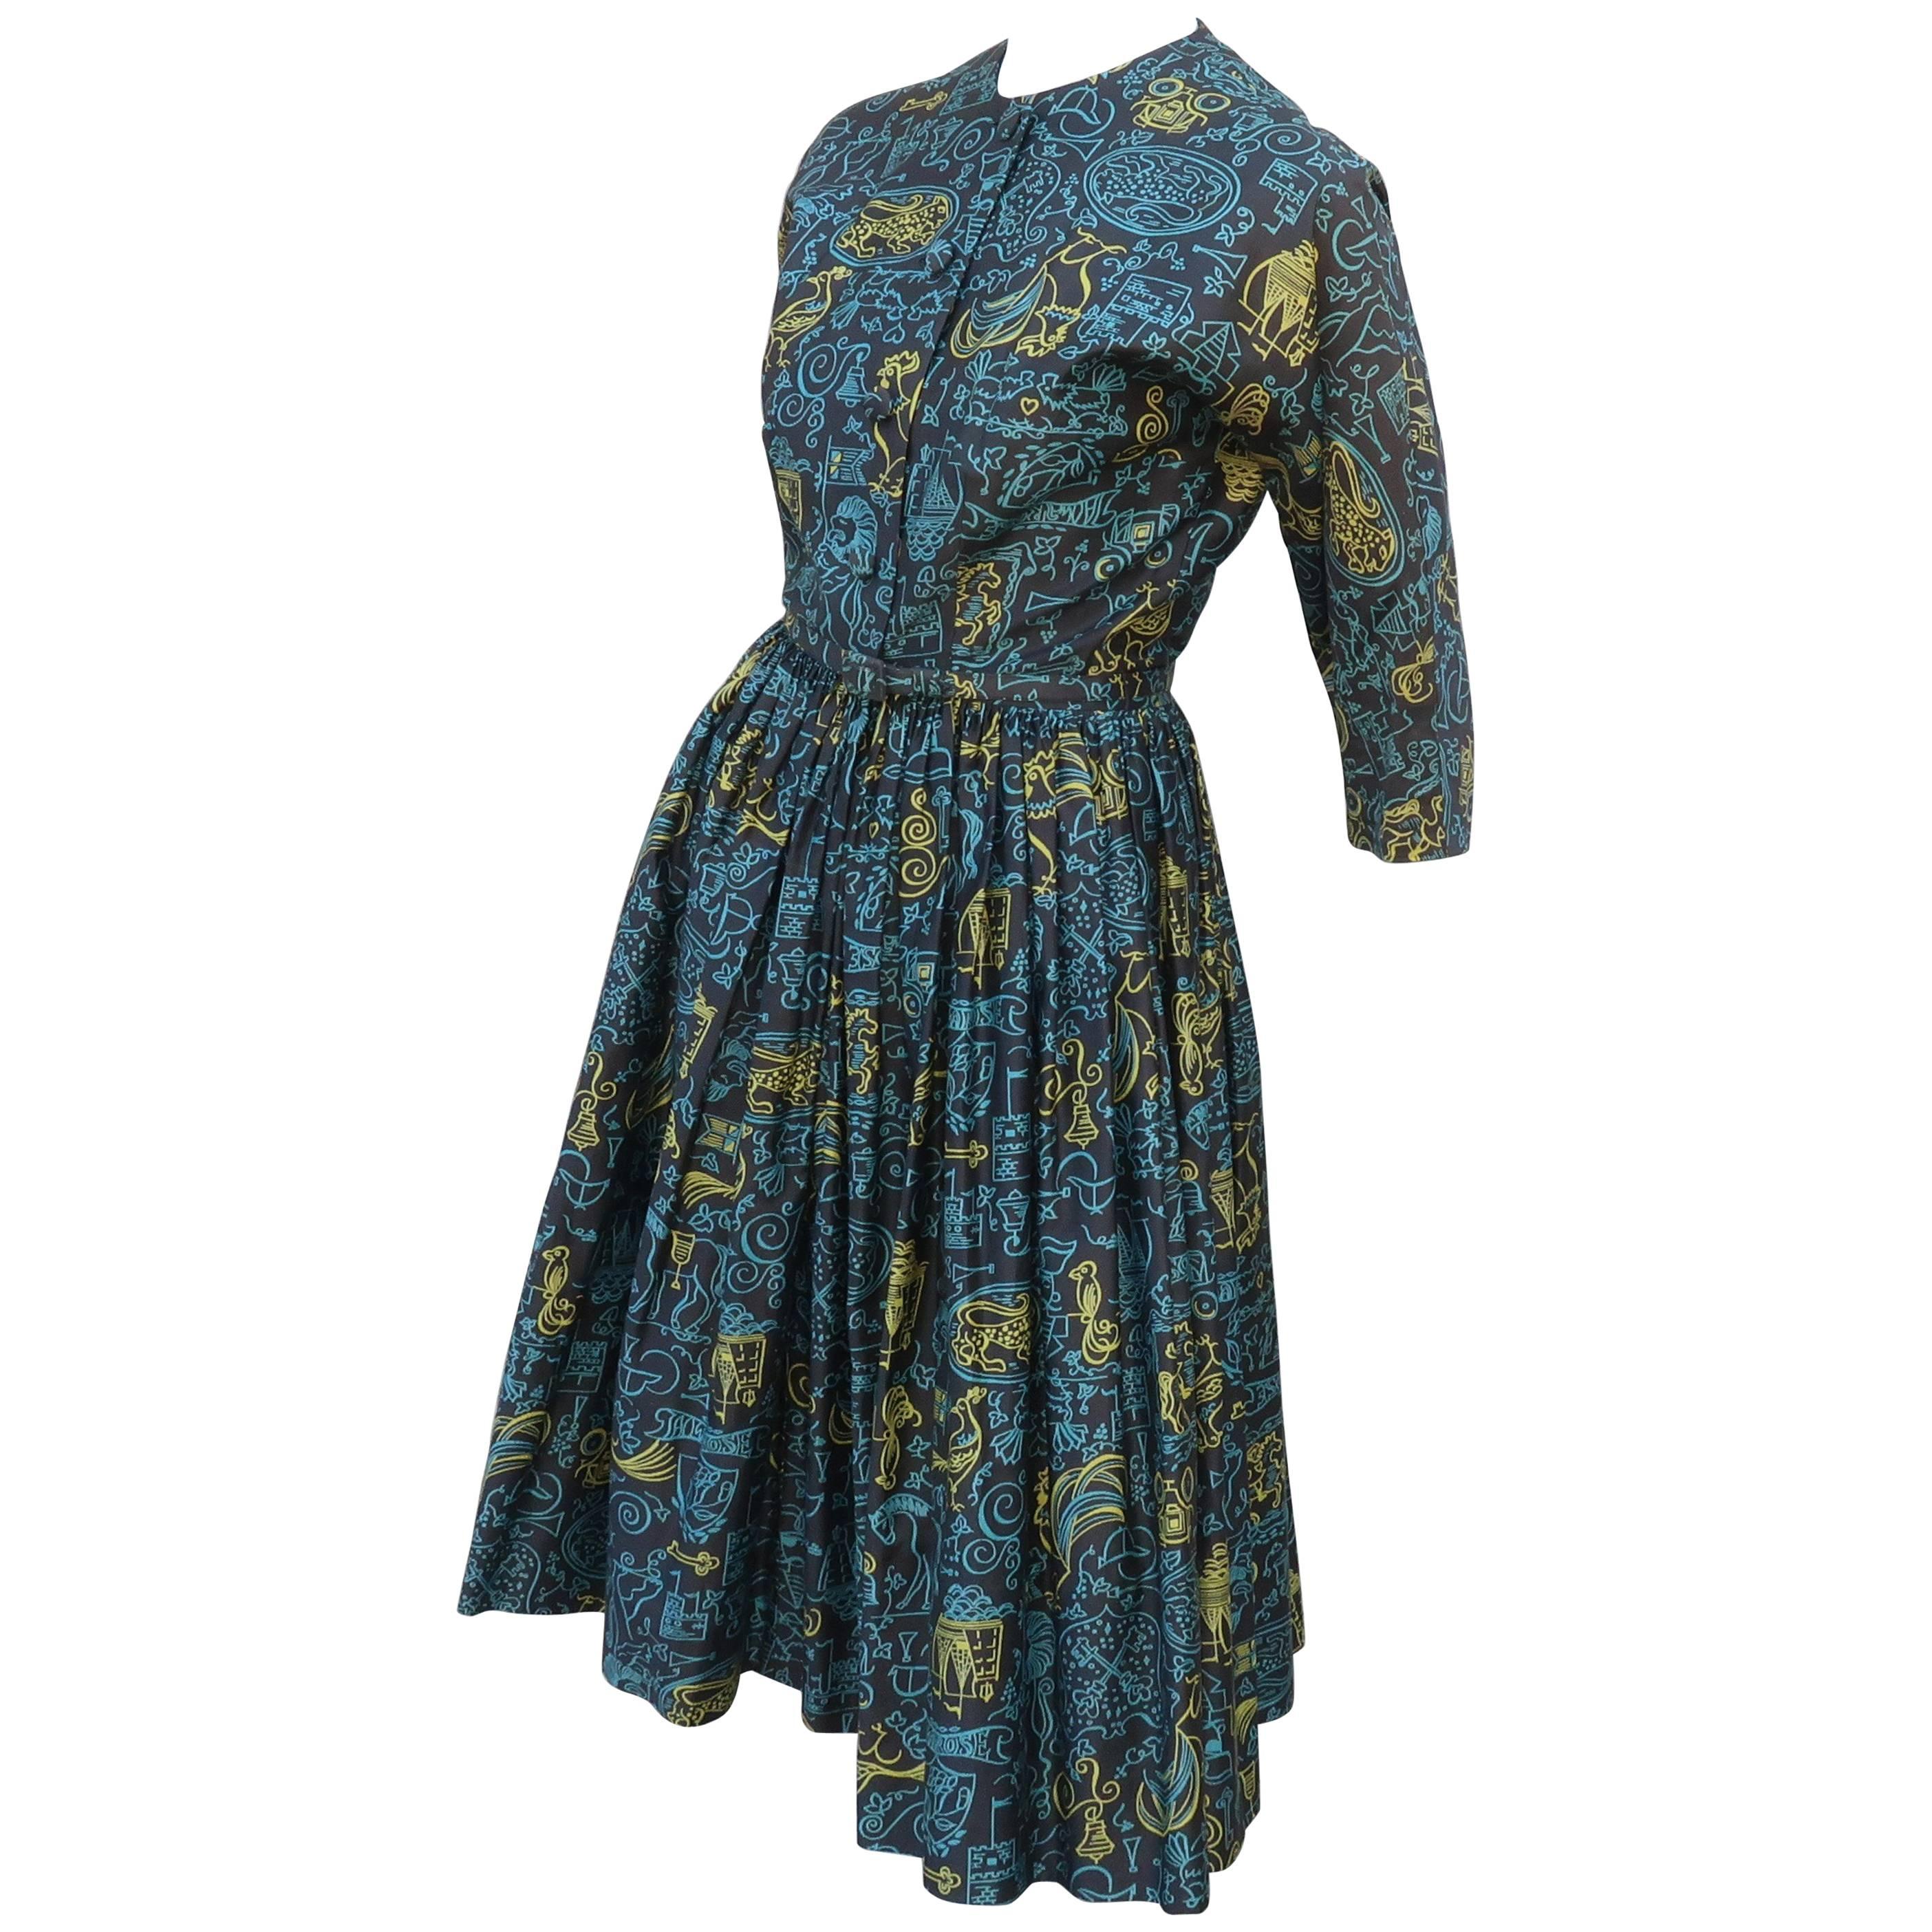 1950's Polished Cotton Shirt Dress With Full Skirt